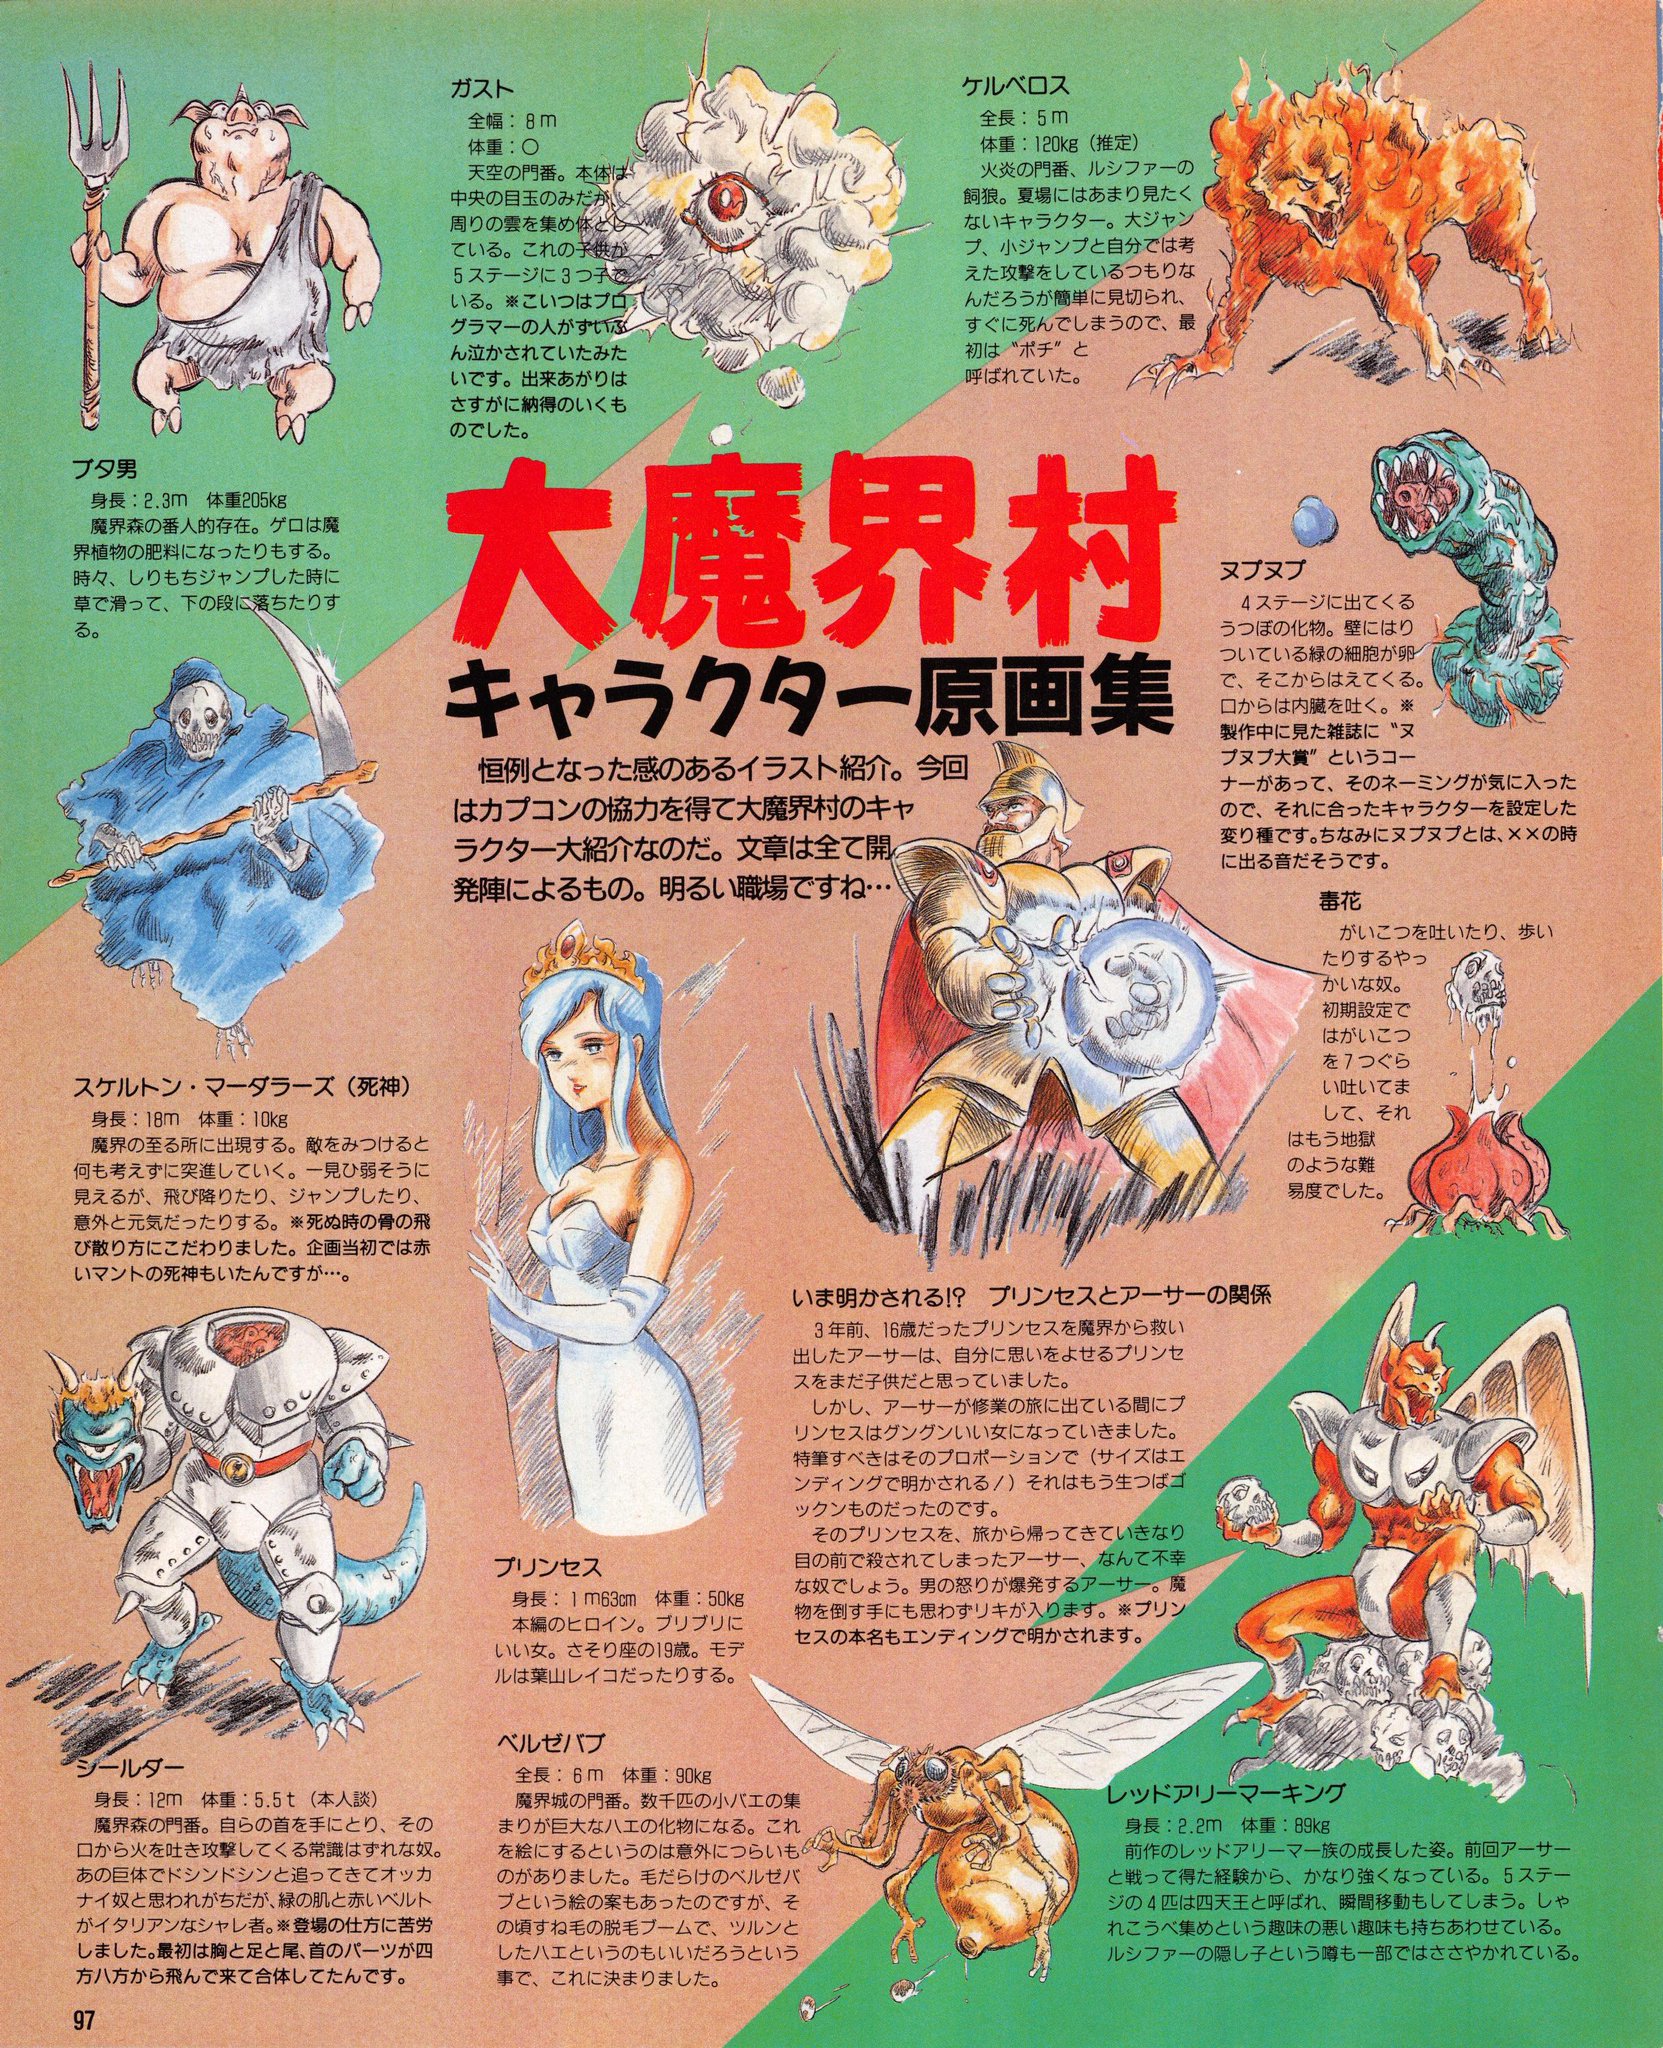 Master Of Puppets Among The Disease Pa Twitter Art Gallery And Character Profiles For Ghouls N Ghosts From Gamest 29 Feb 19 There S An Interesting Bit About Arthur And The Princess That